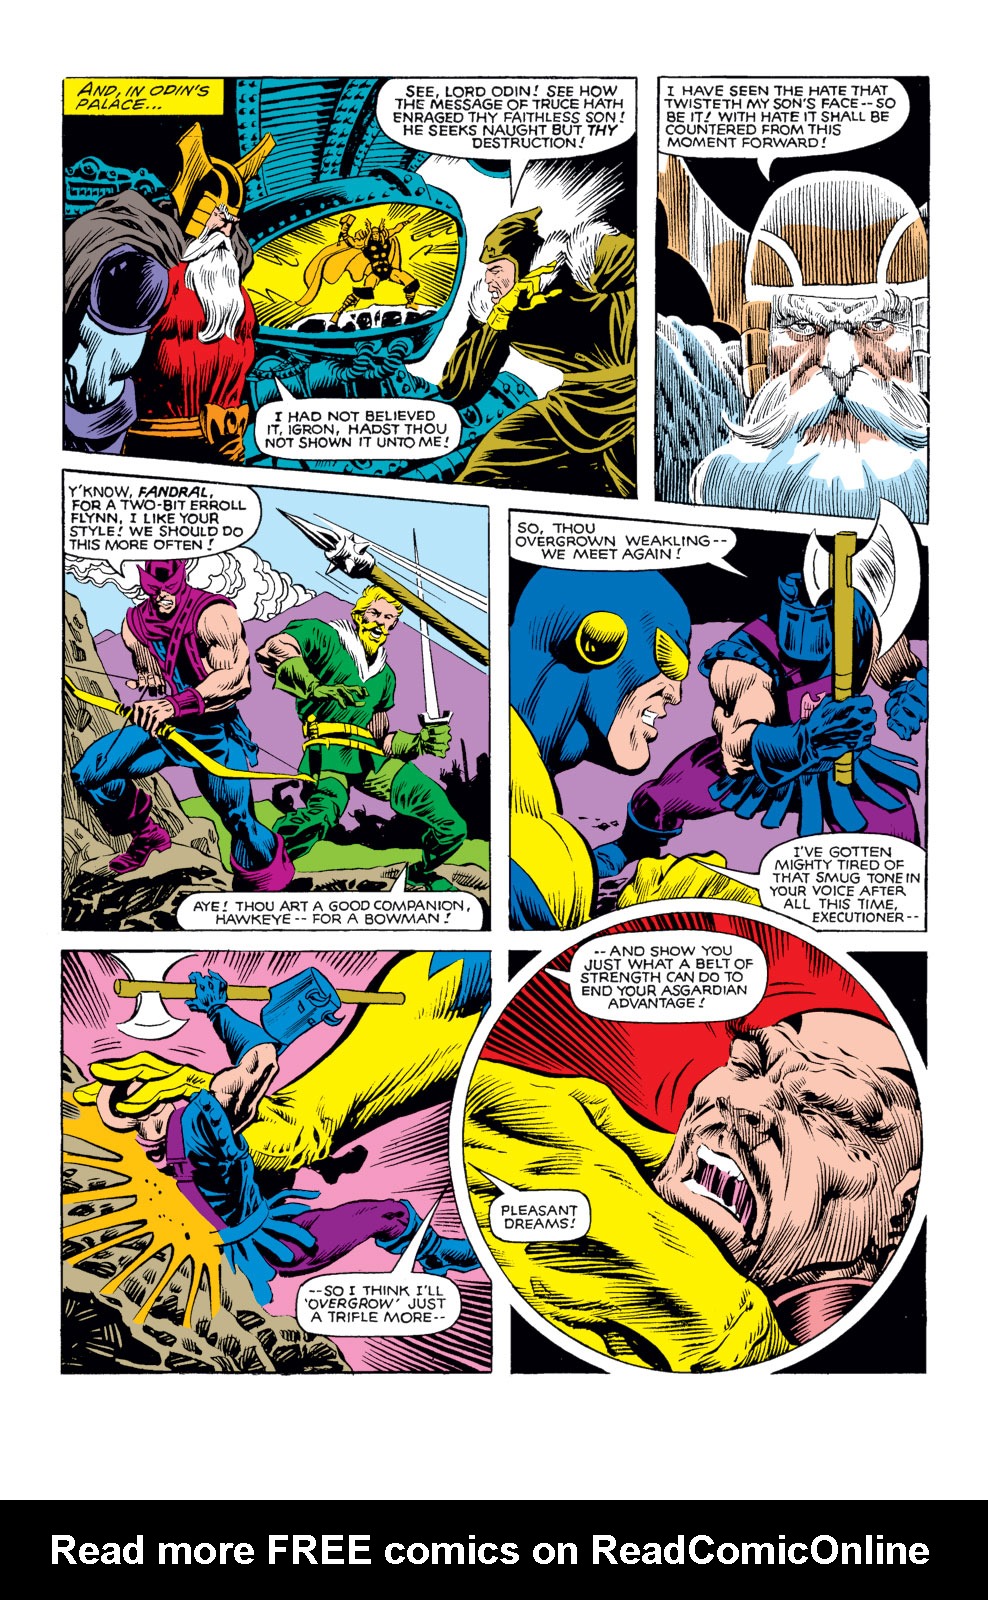 What If? (1977) issue 25 - Thor and the Avengers battled the gods - Page 23